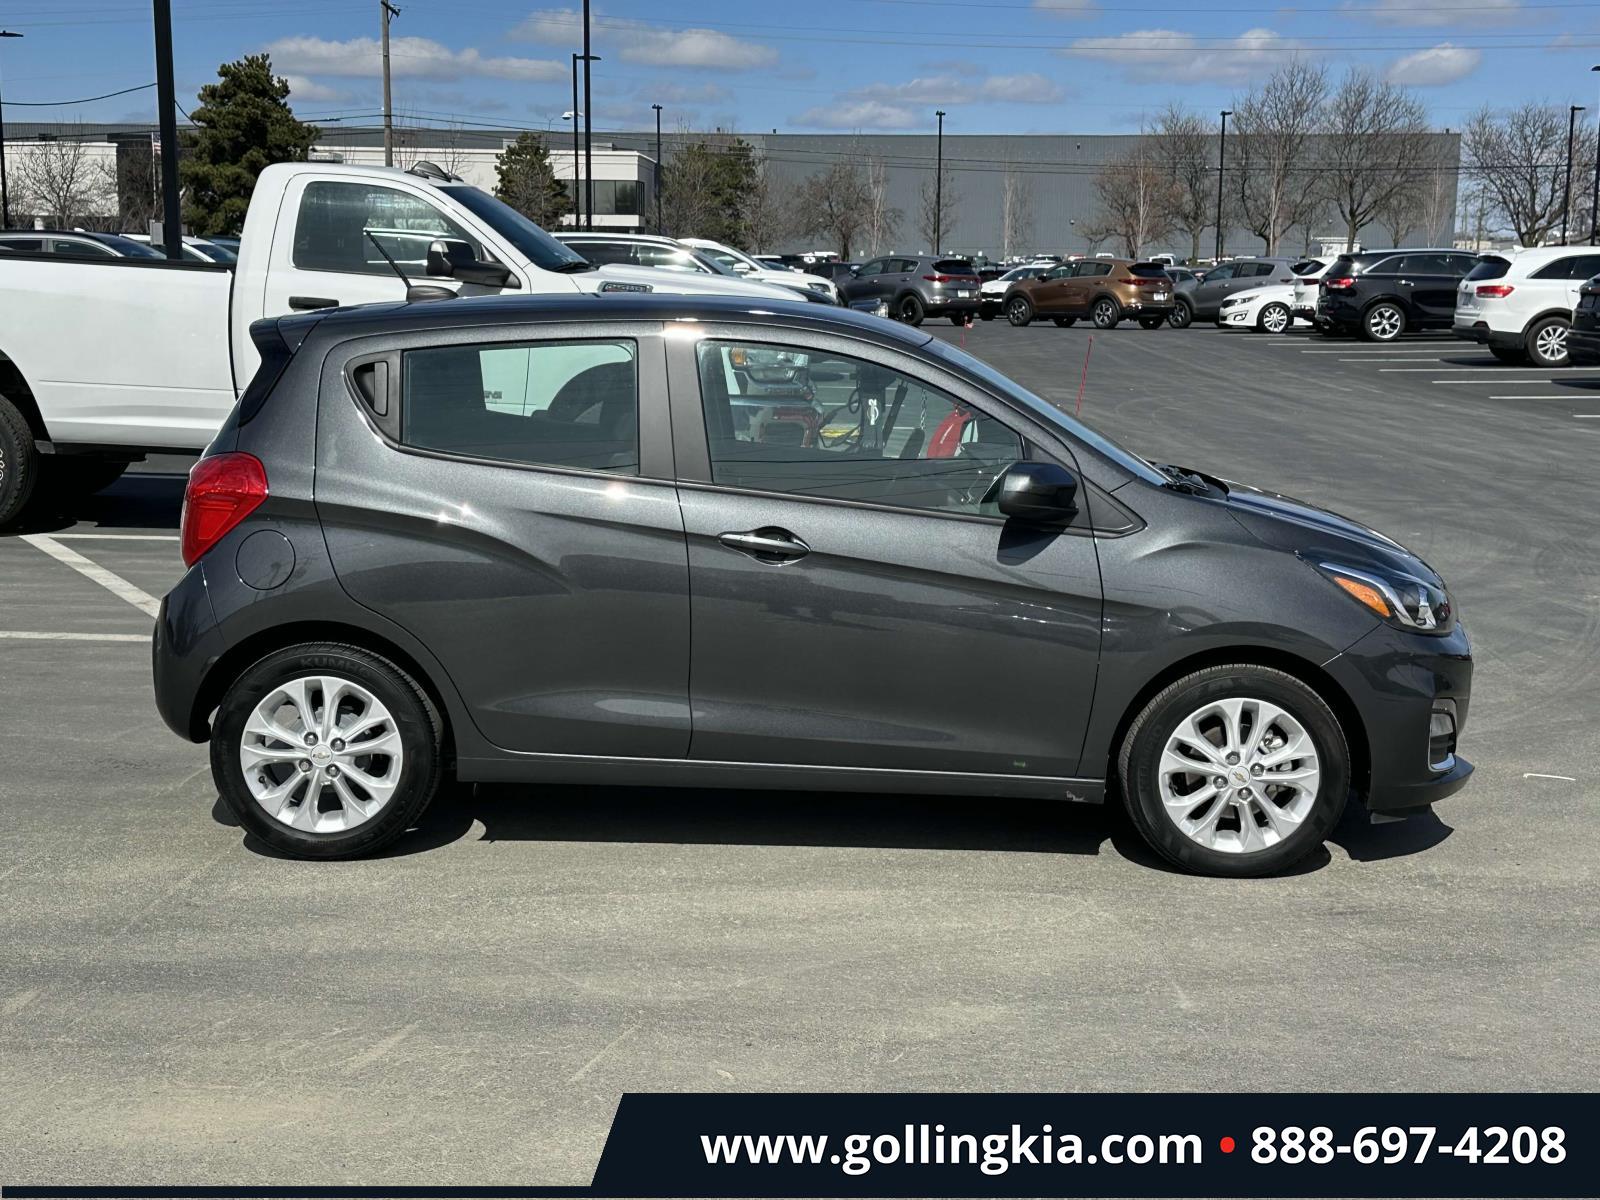 Used 2020 Chevrolet Spark 1LT with VIN KL8CD6SAXLC431922 for sale in Madison Heights, MI